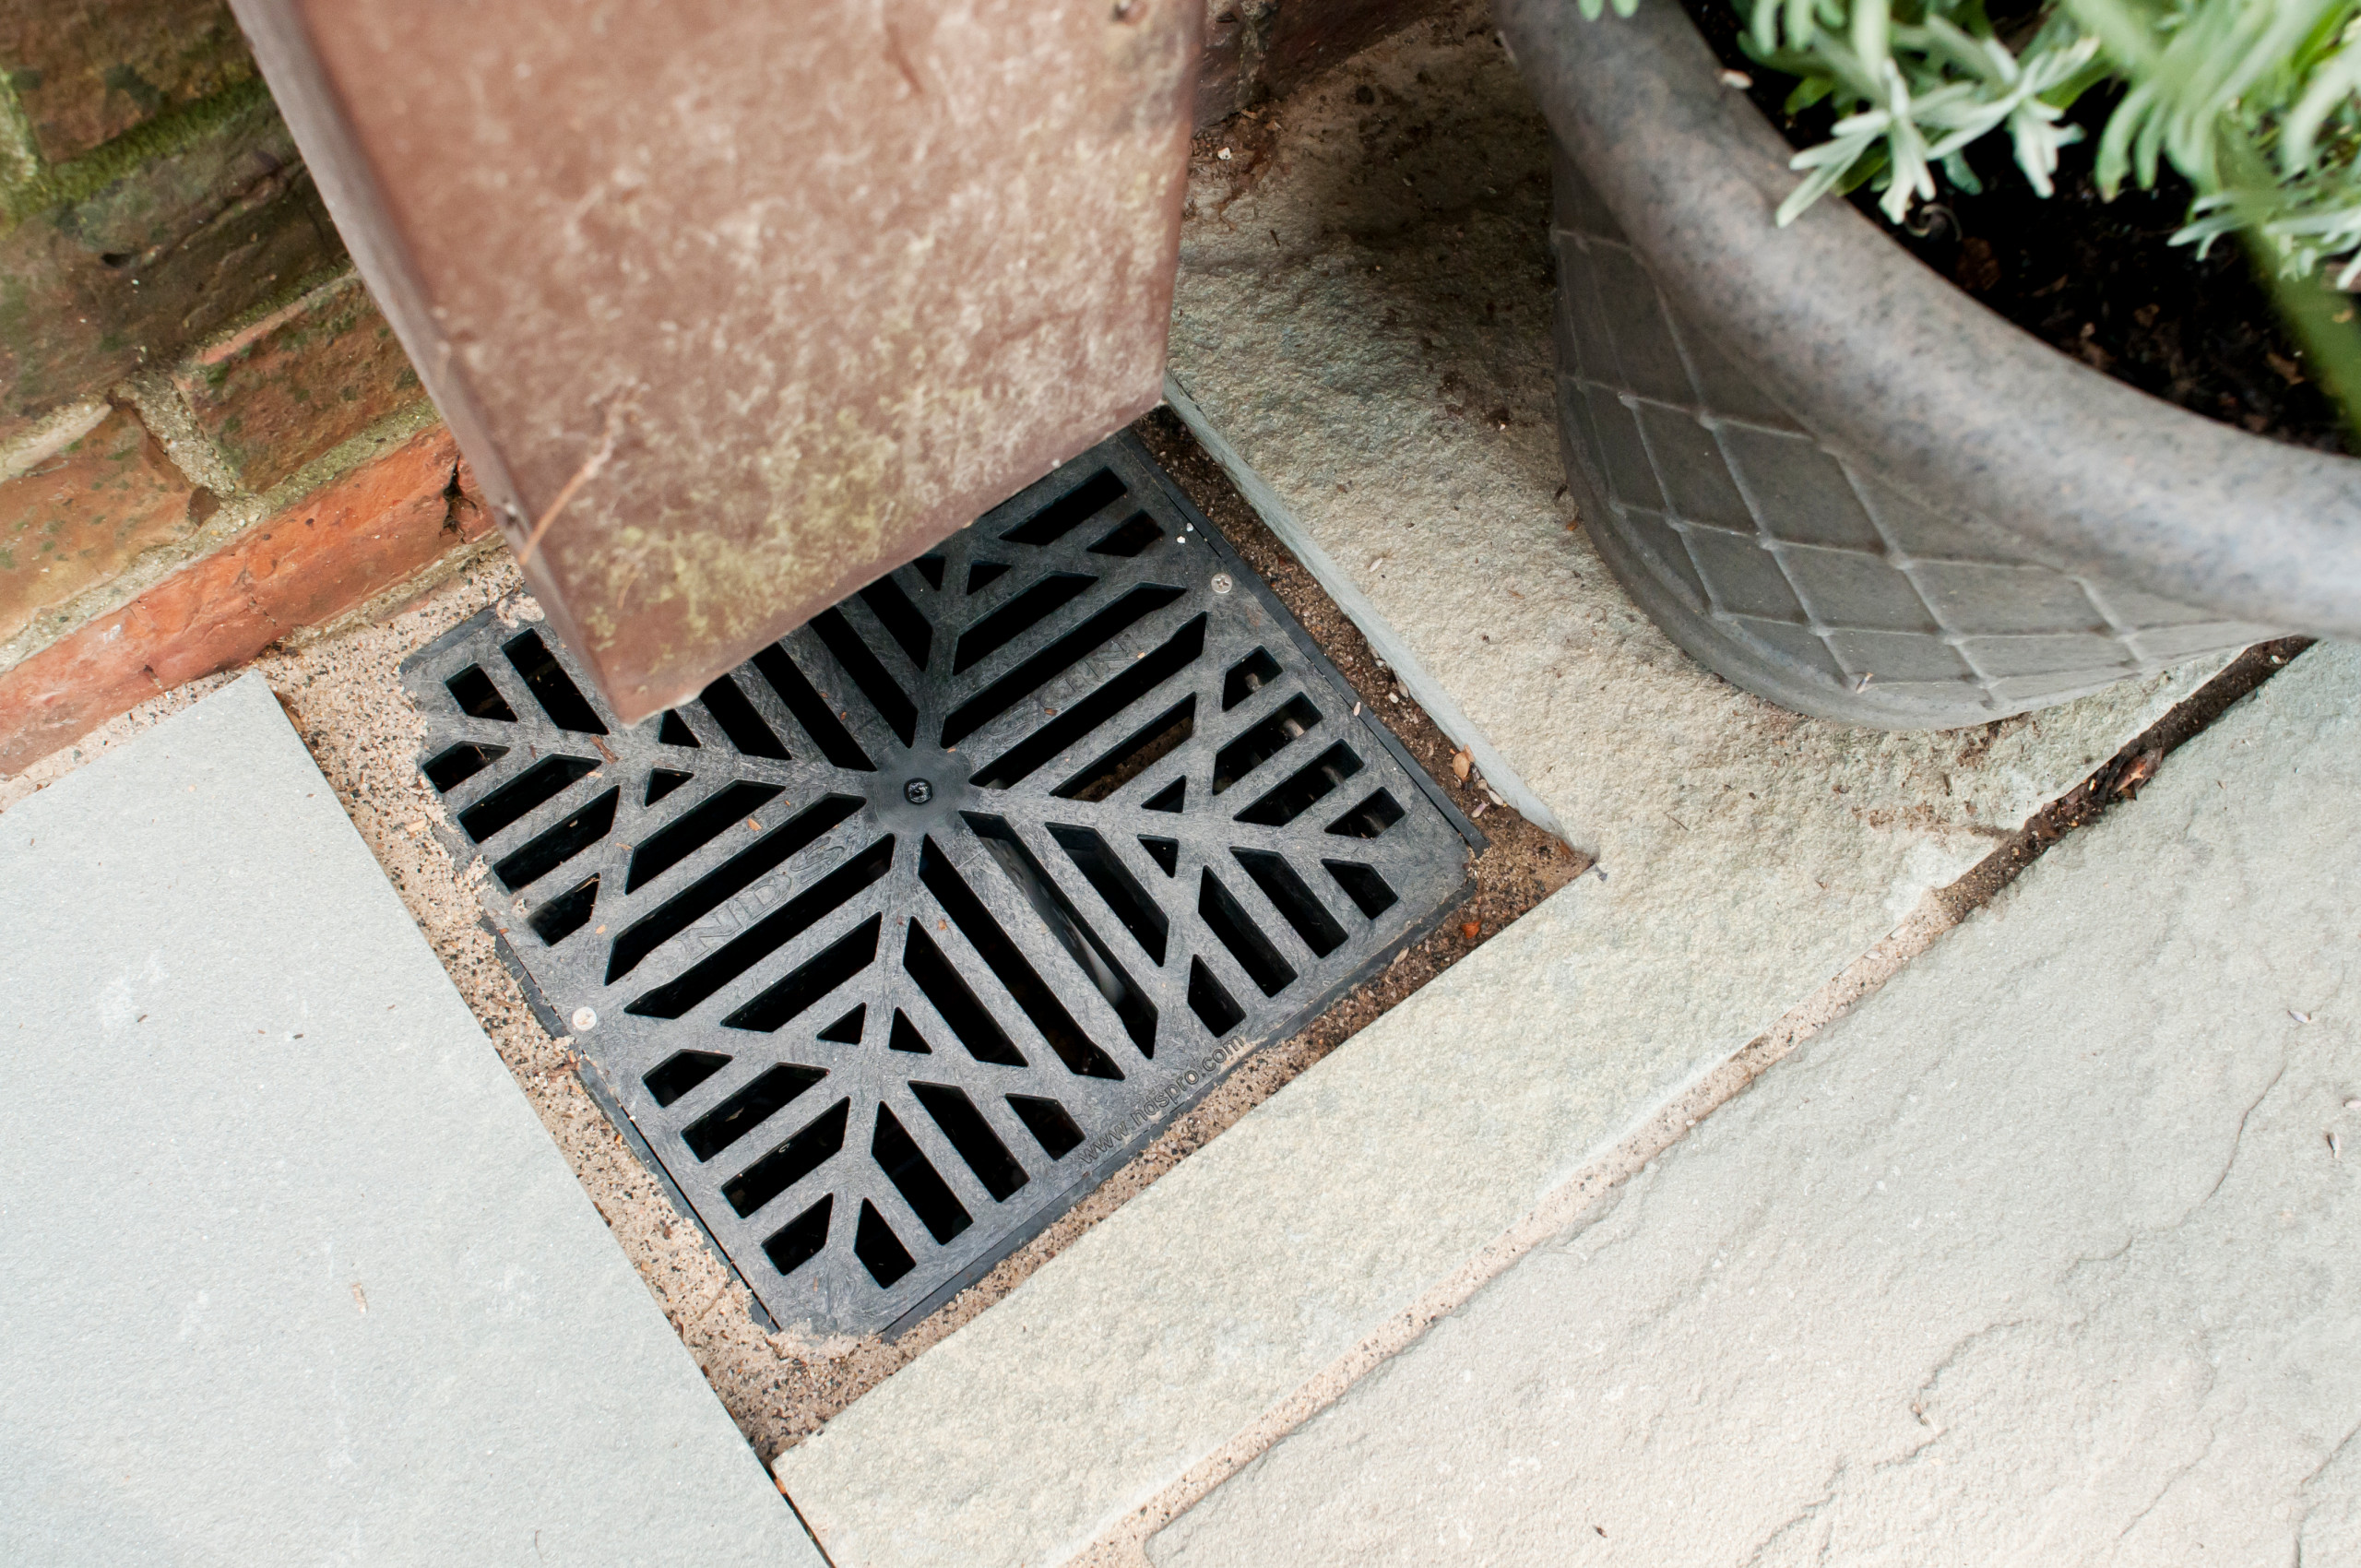 An attractive drain grate for the downspout